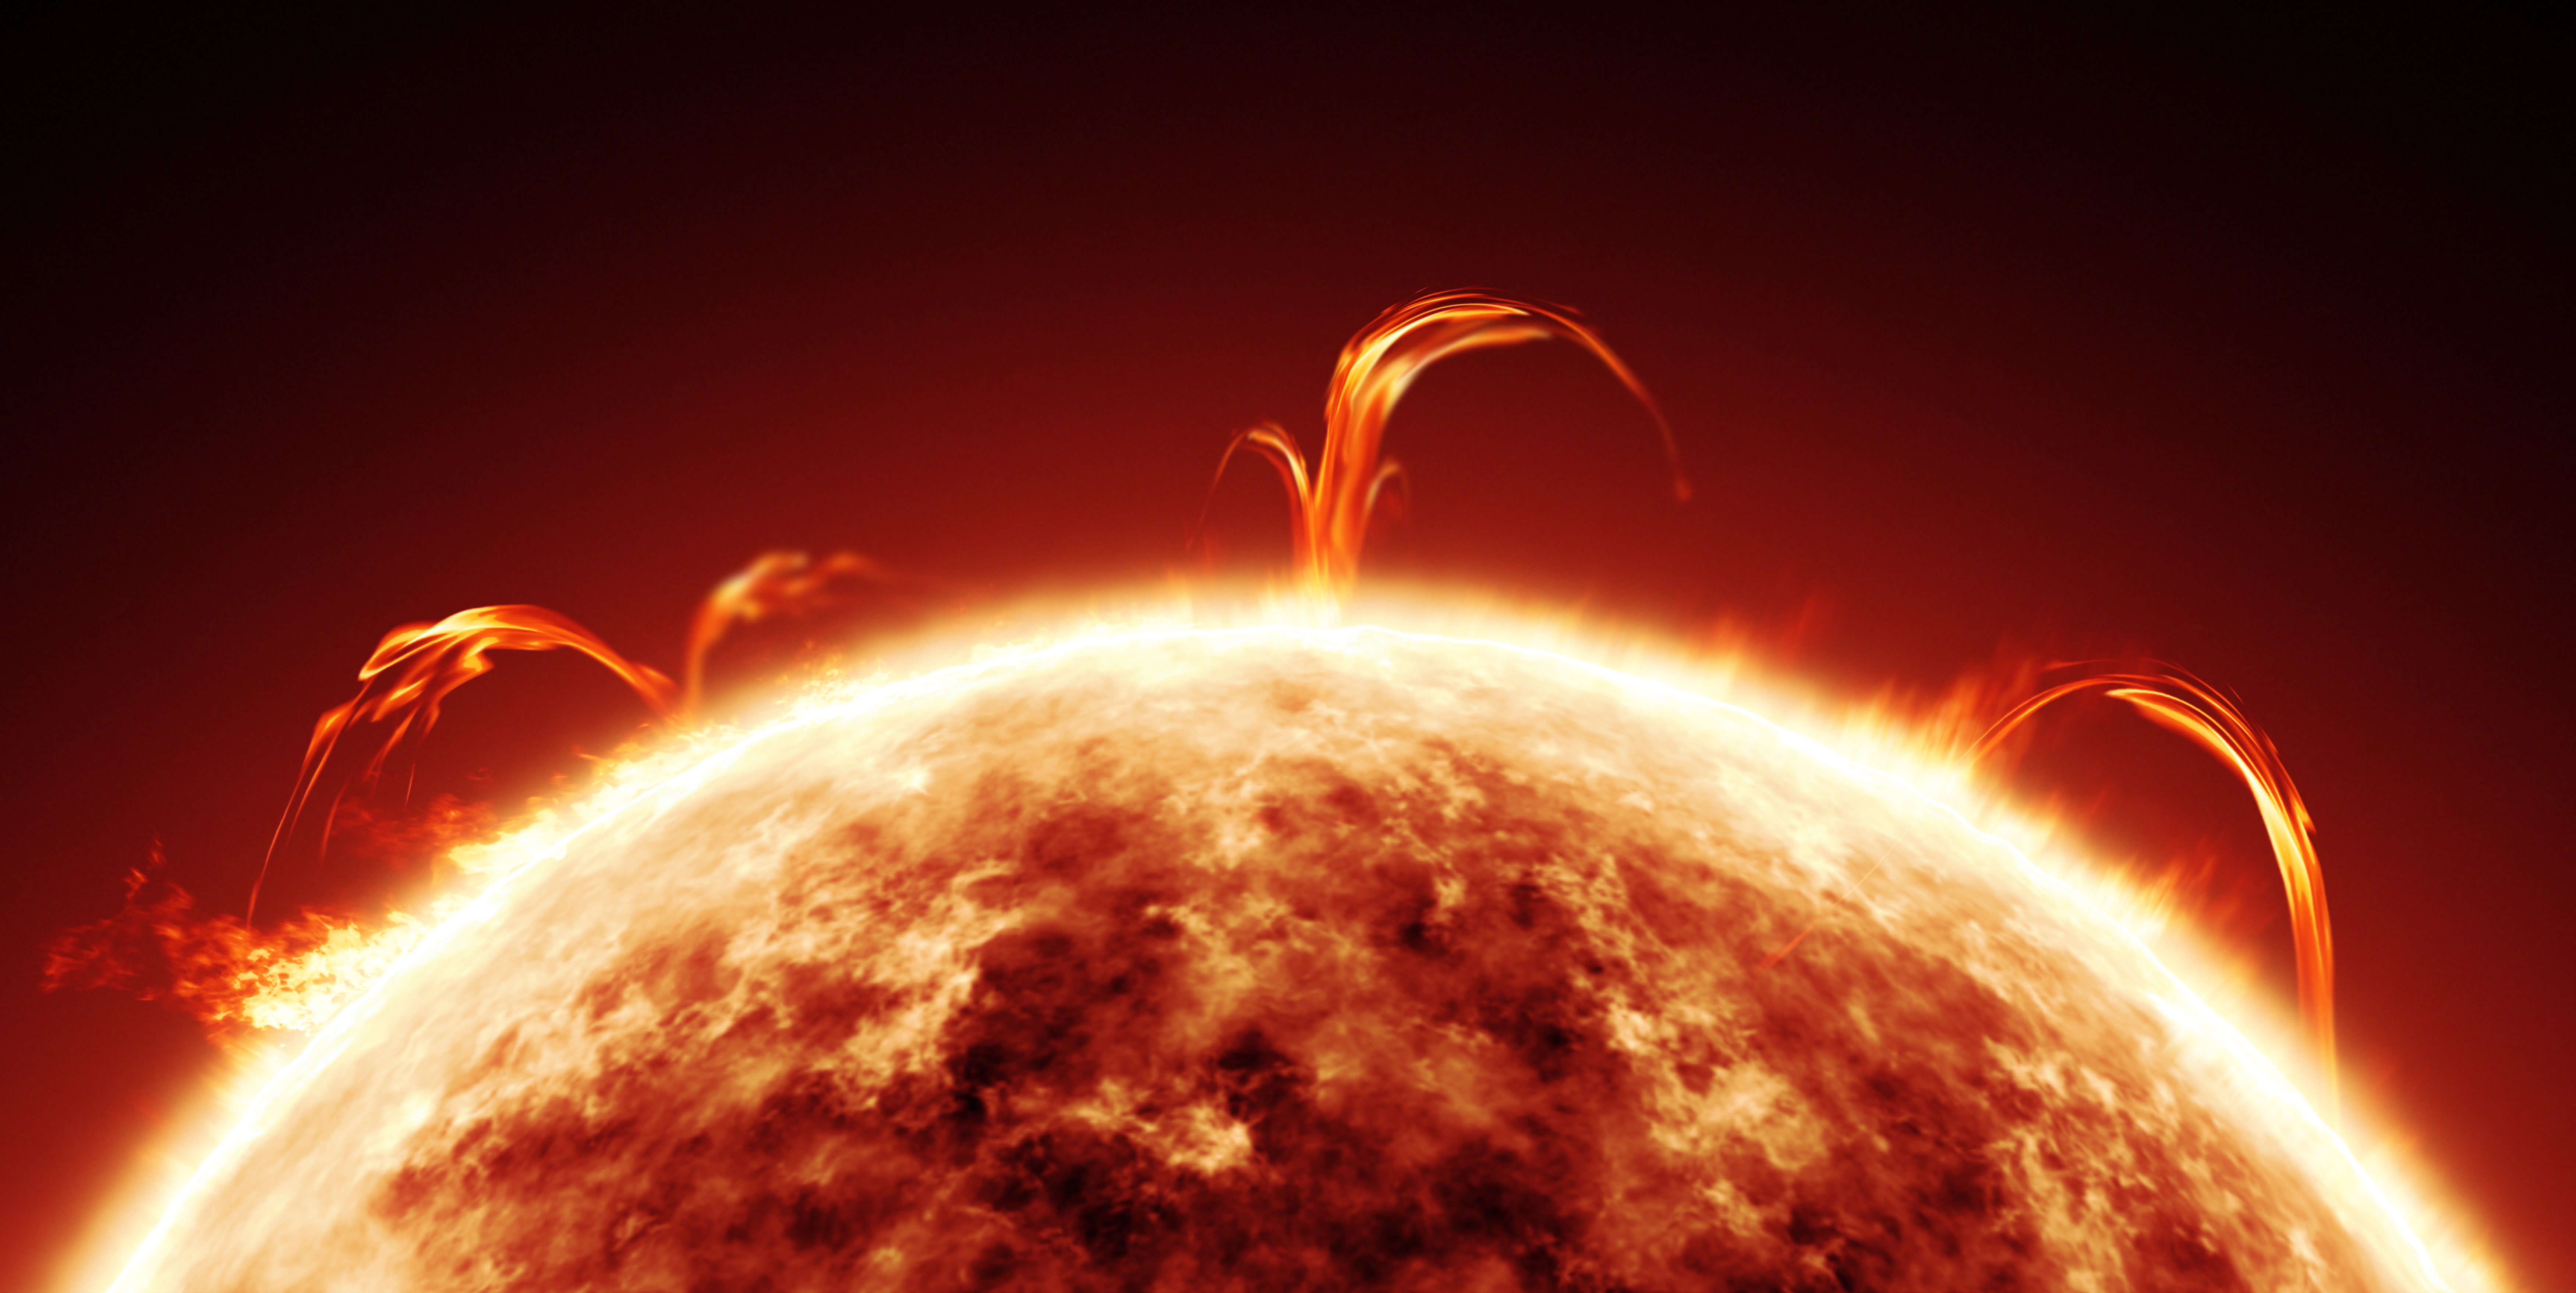 A close-up of the sun depicting solar surface activity and the corona.